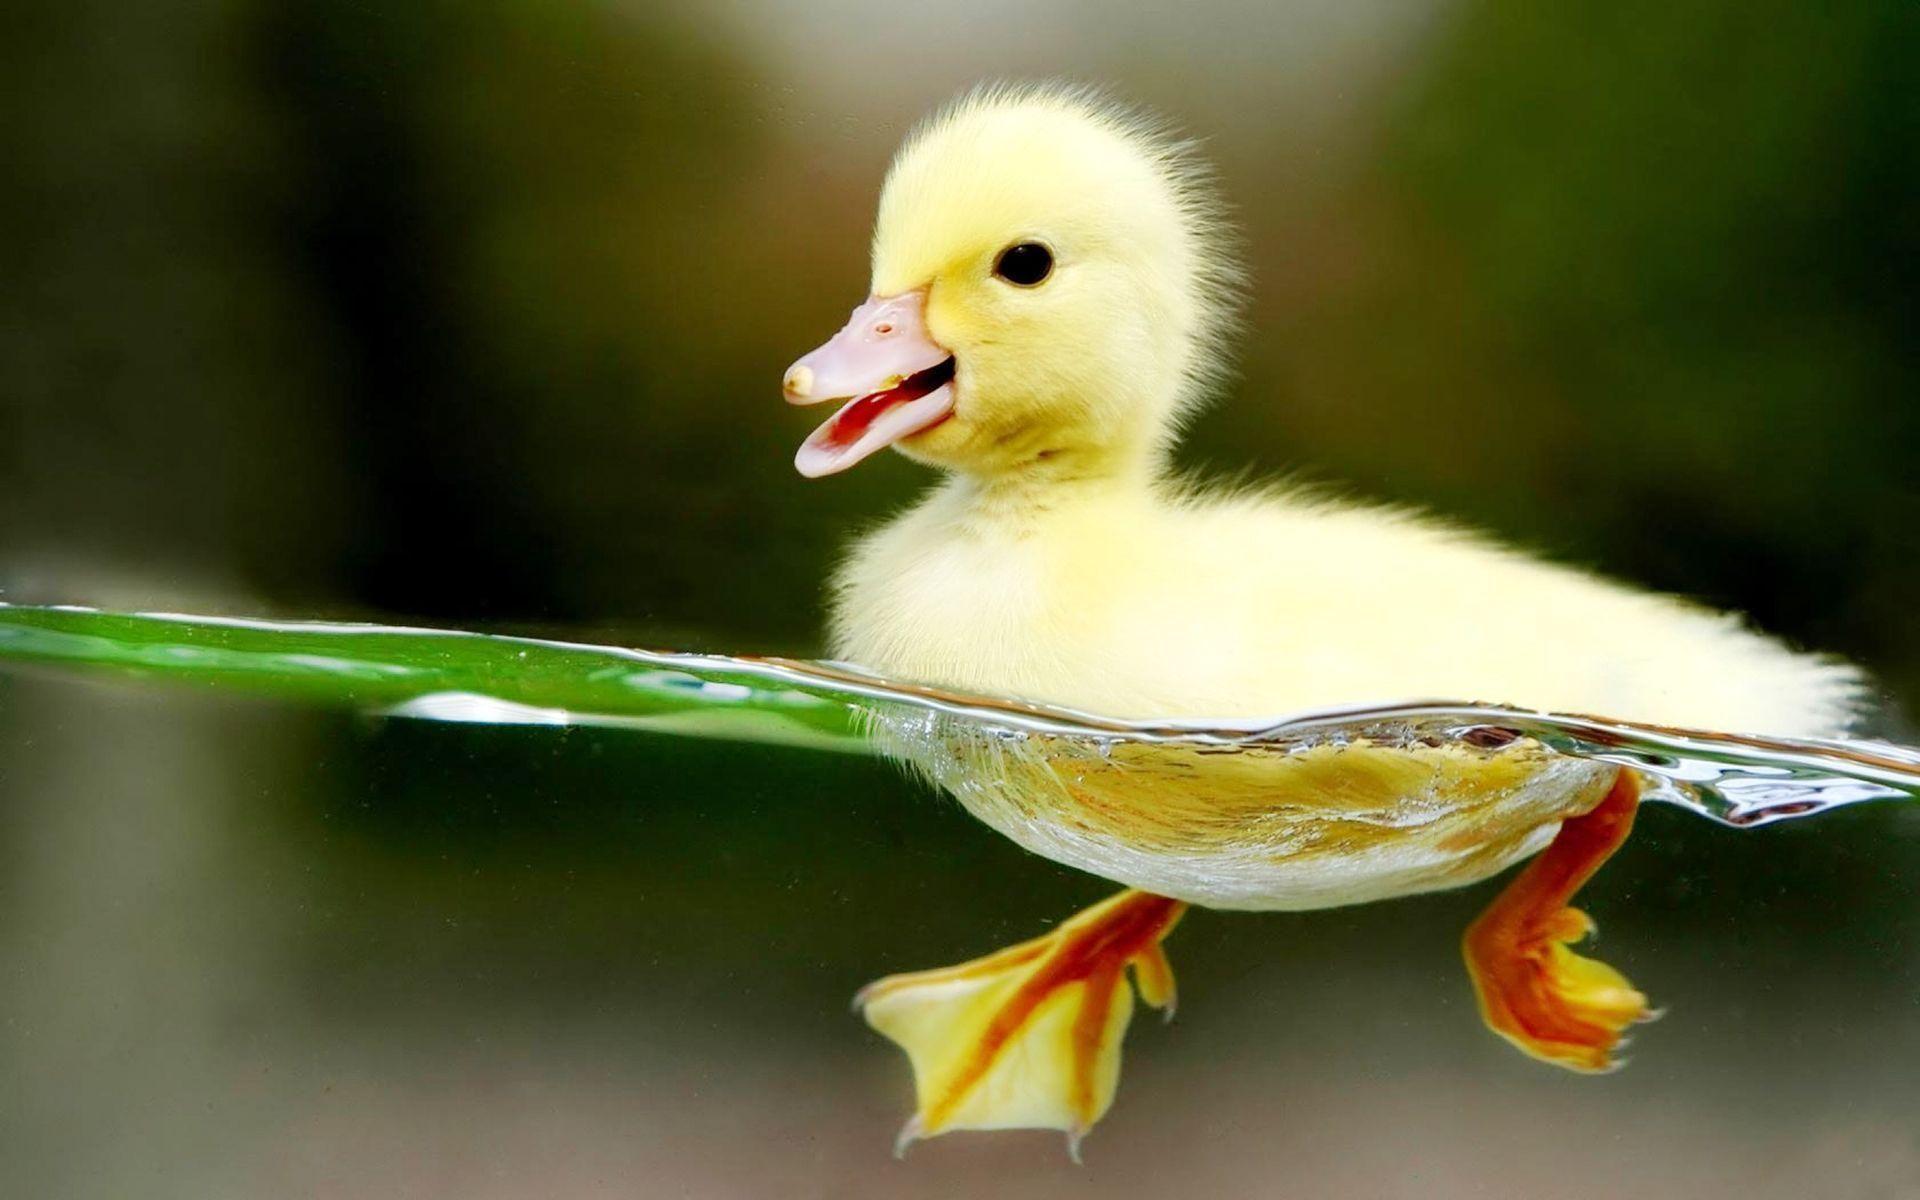 Funny Duck Background Images HD Pictures and Wallpaper For Free Download   Pngtree